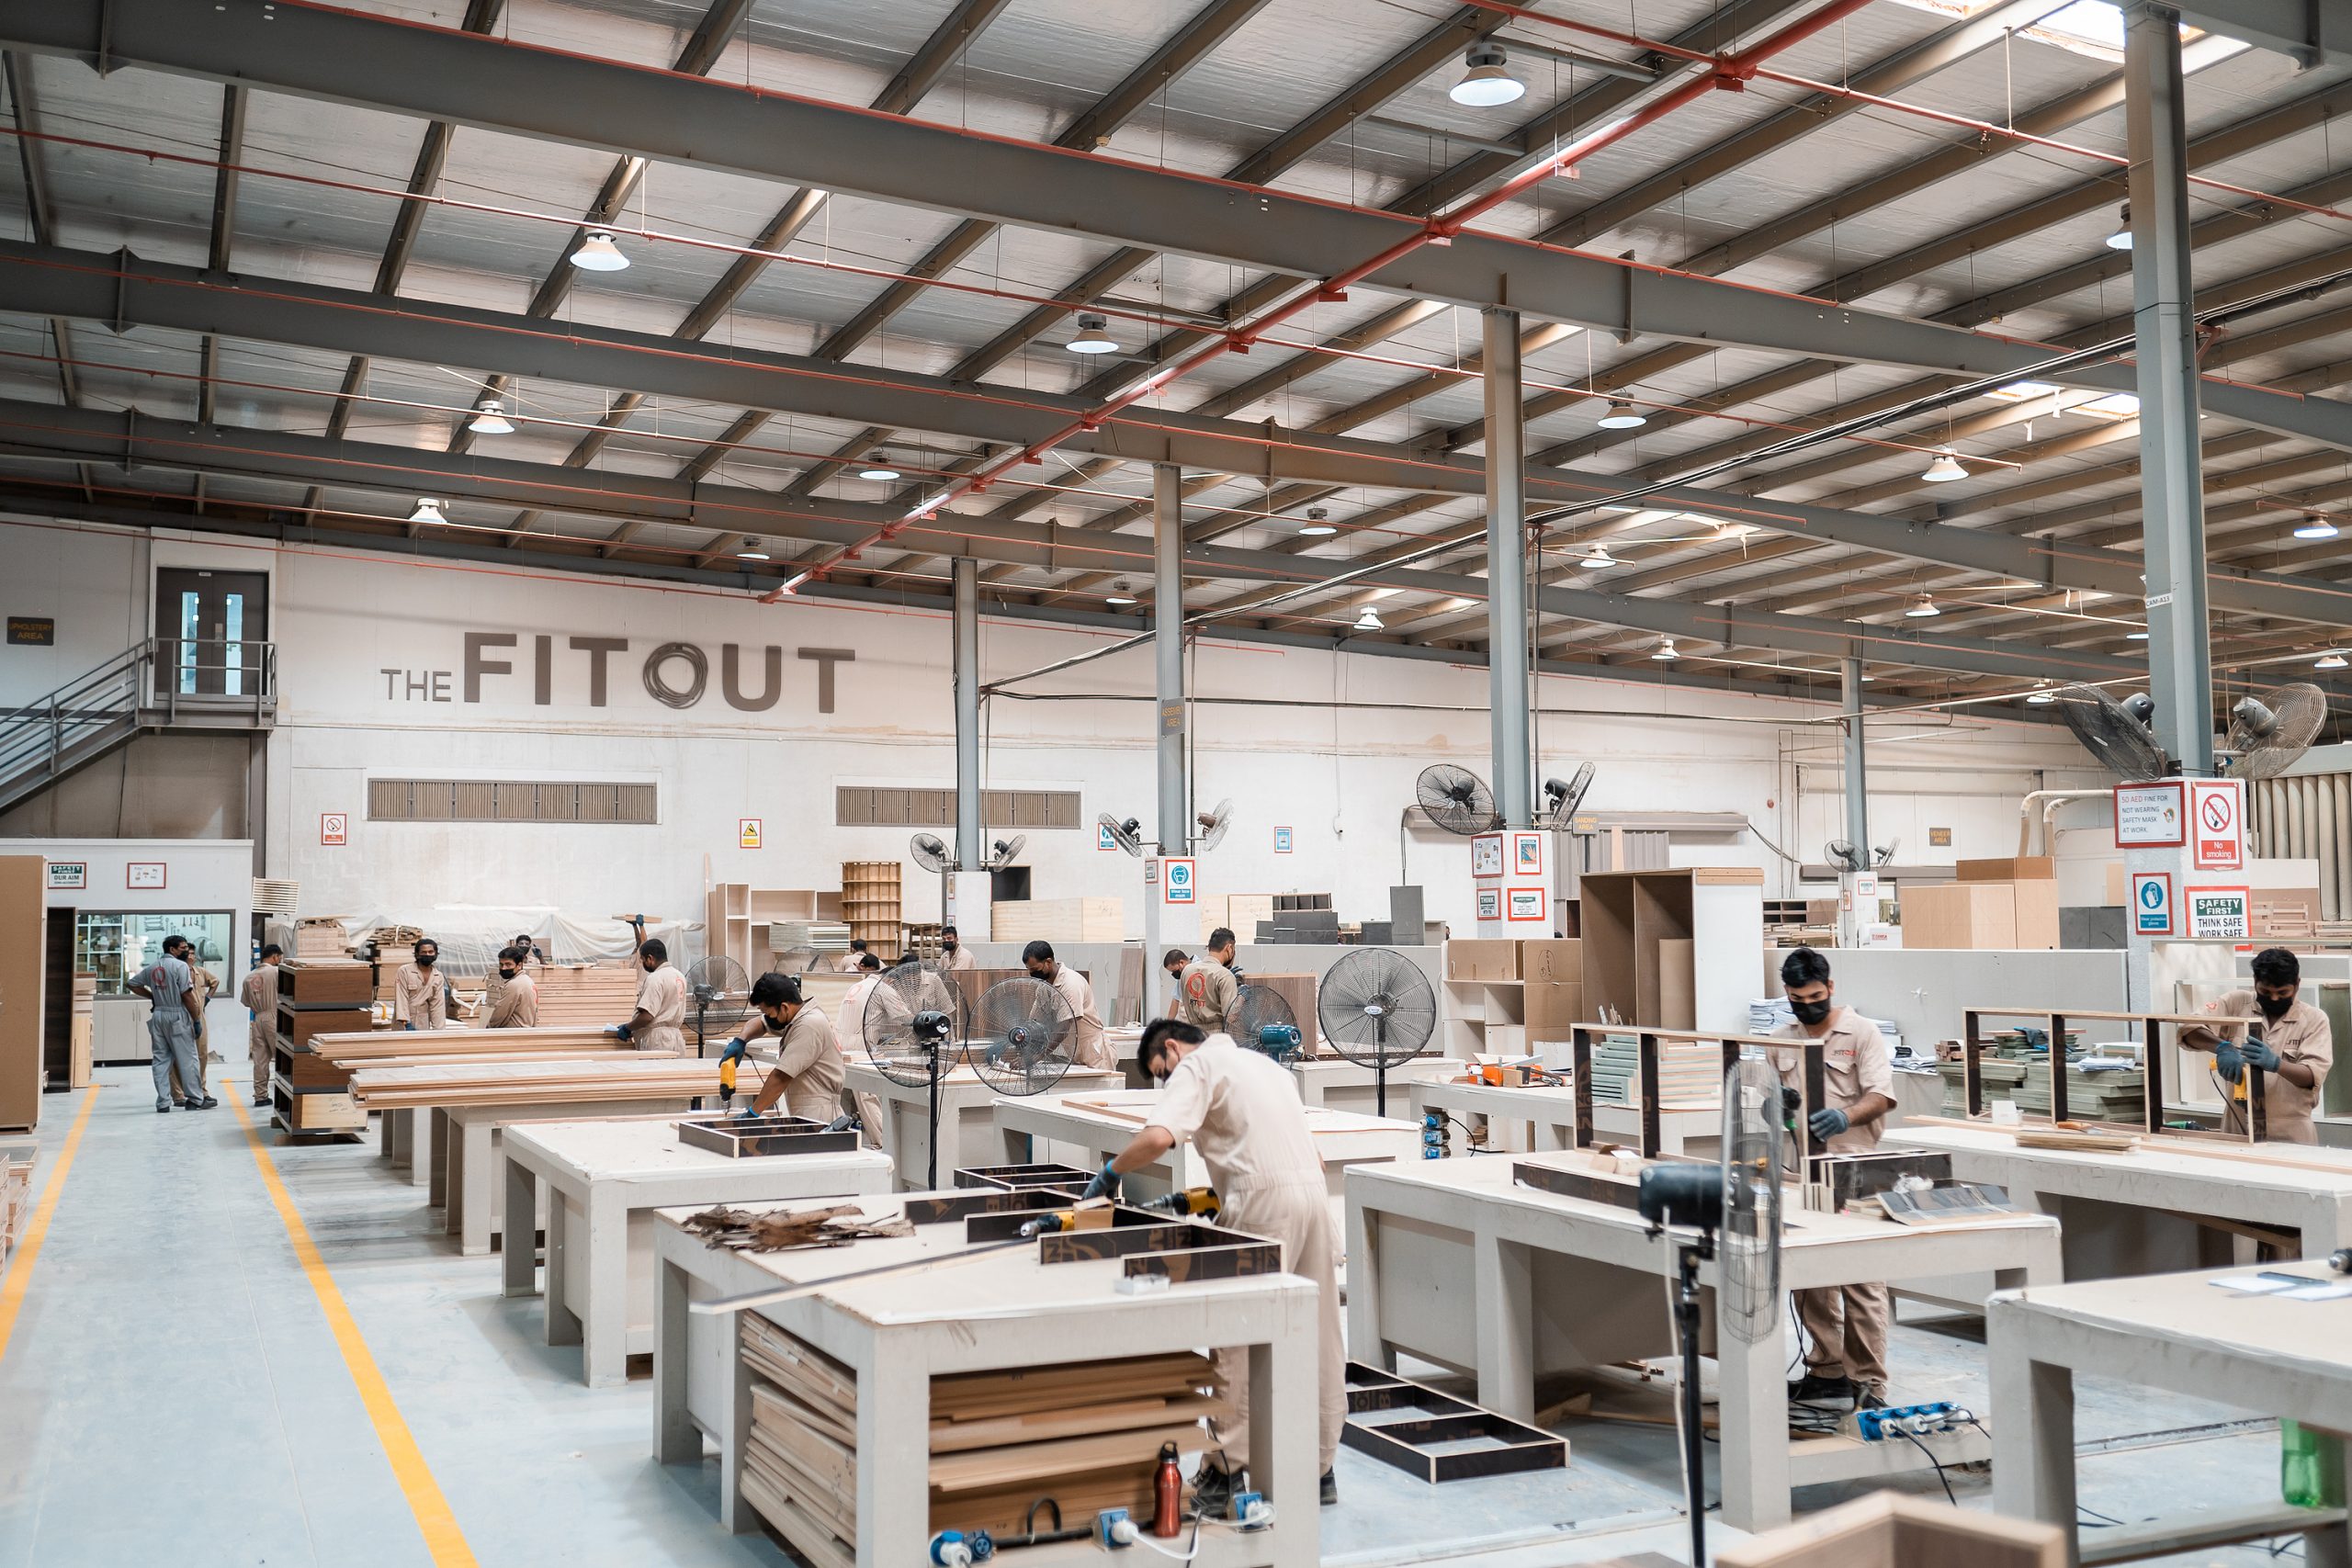 Understanding the relevance of joinery work in the fit-out industry